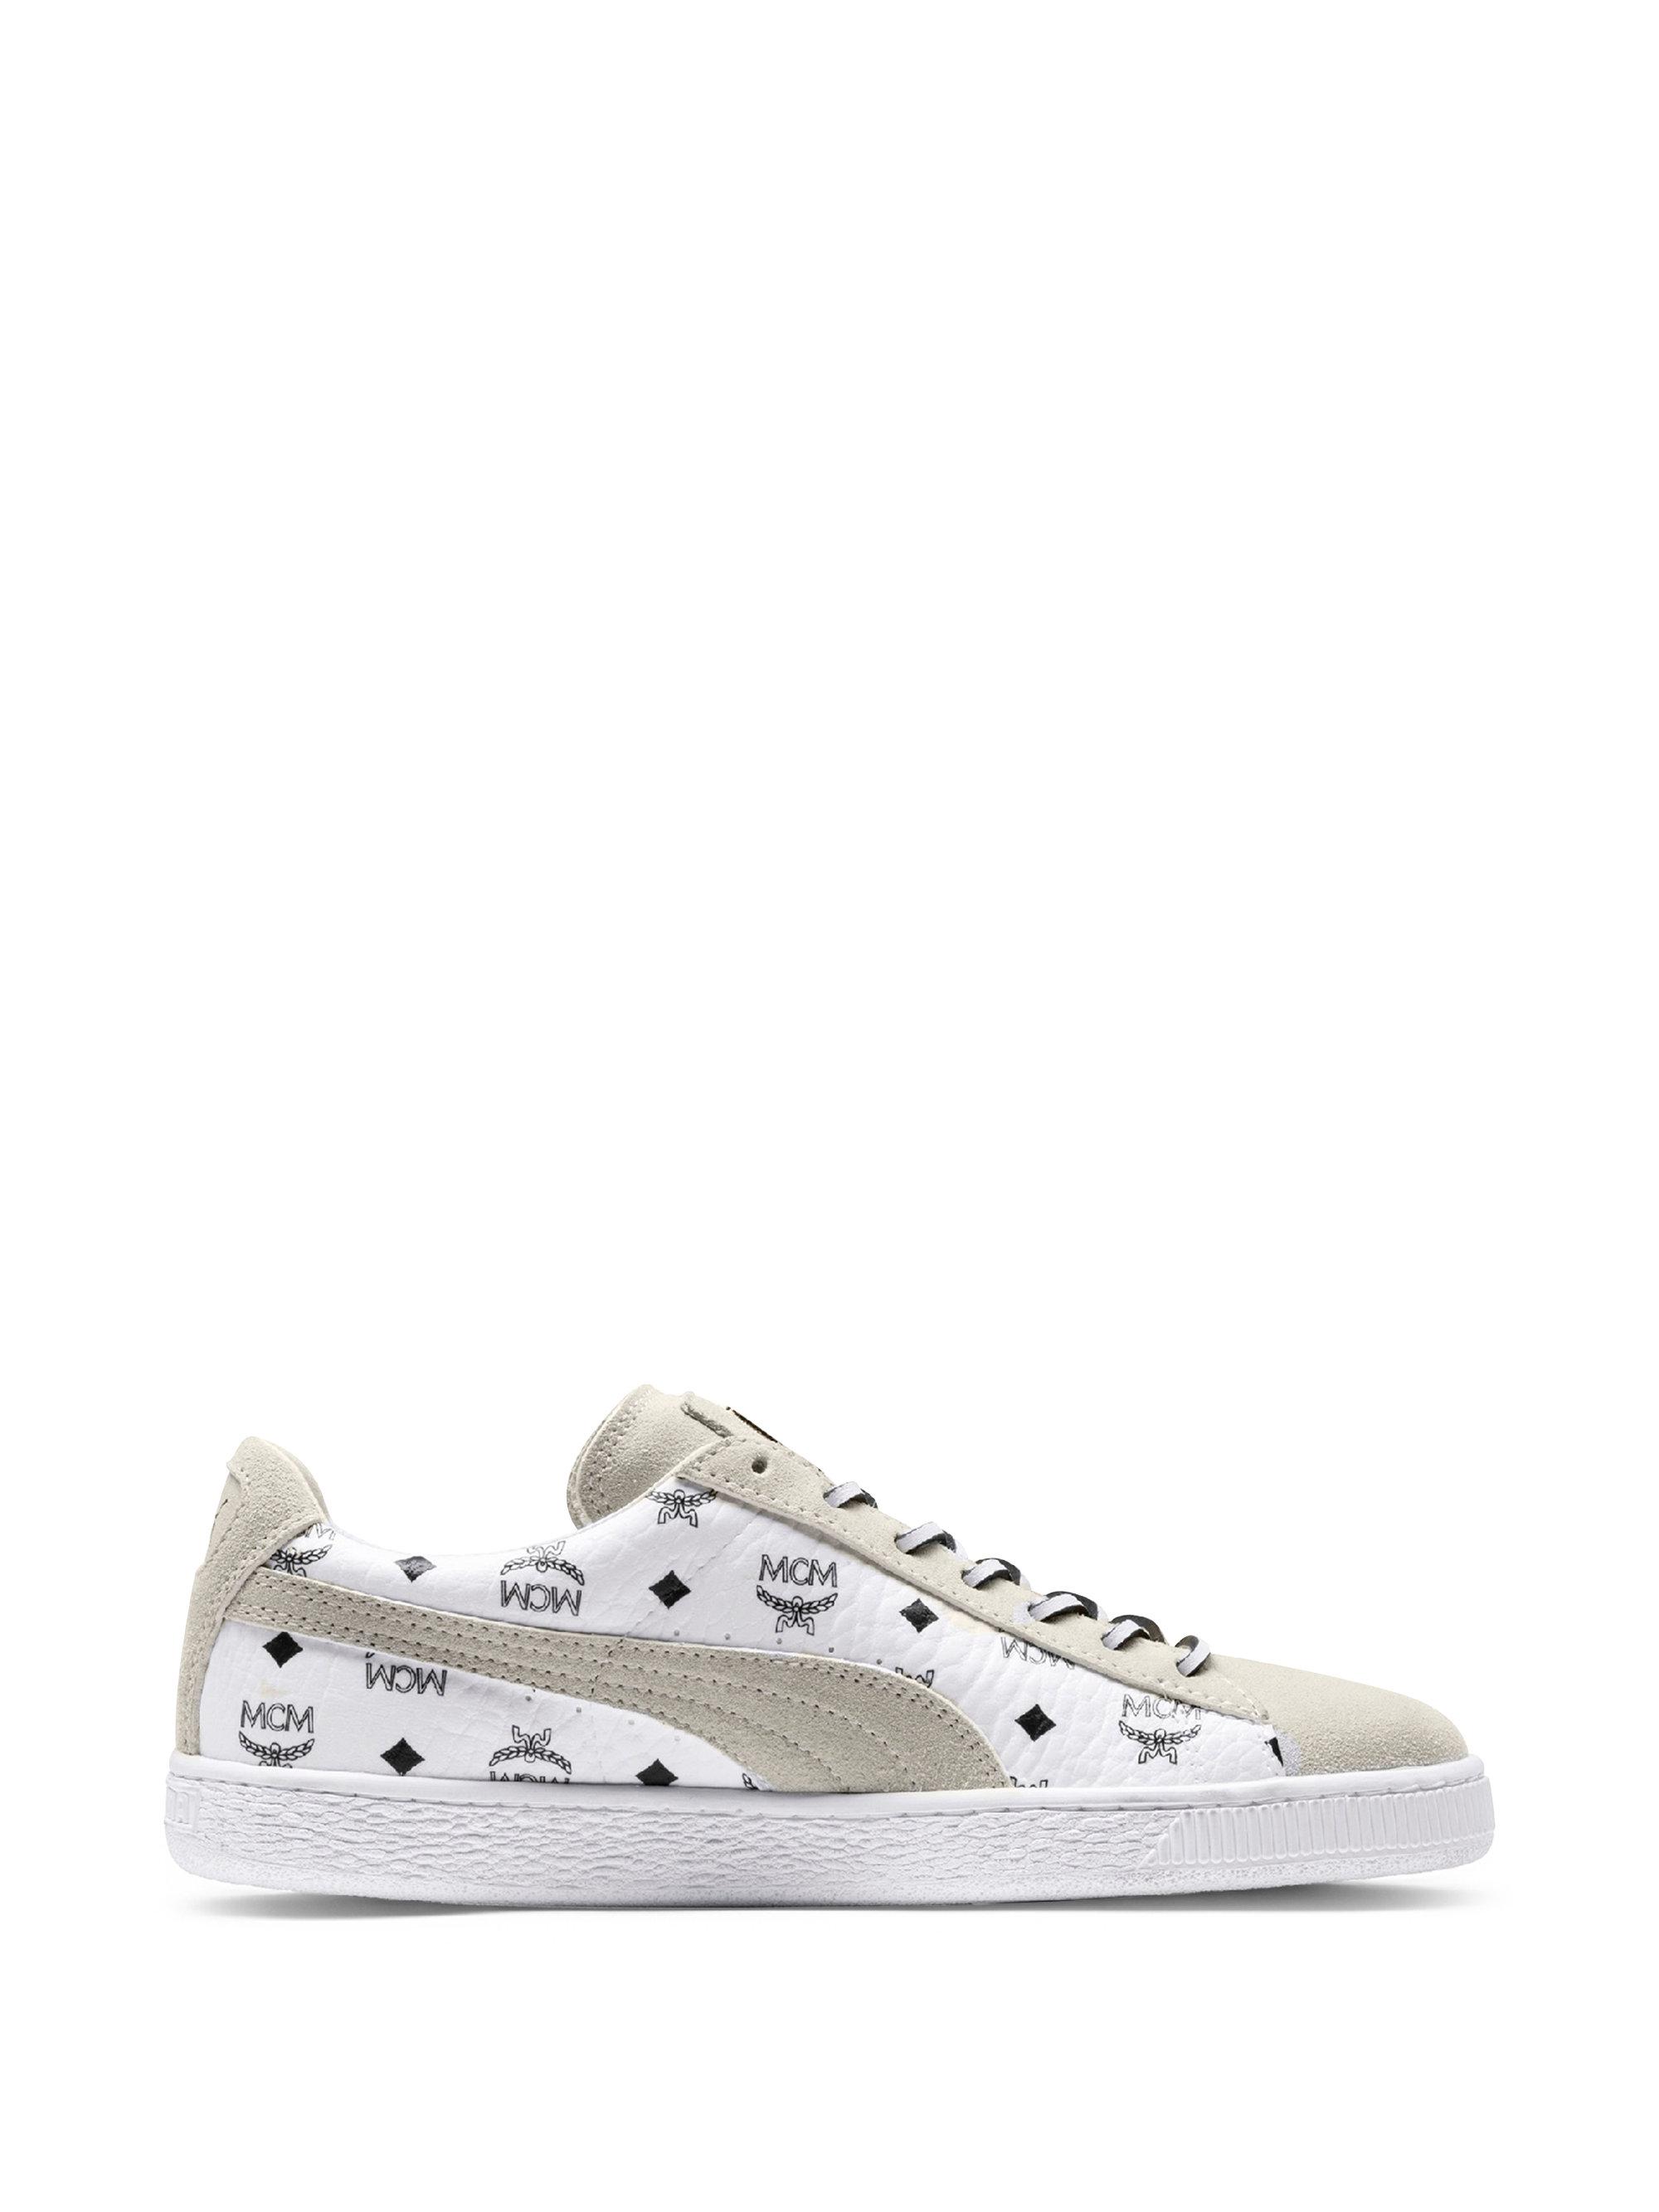 PUMA X Mcm Suede Classic Sneakers in White for Men | Lyst